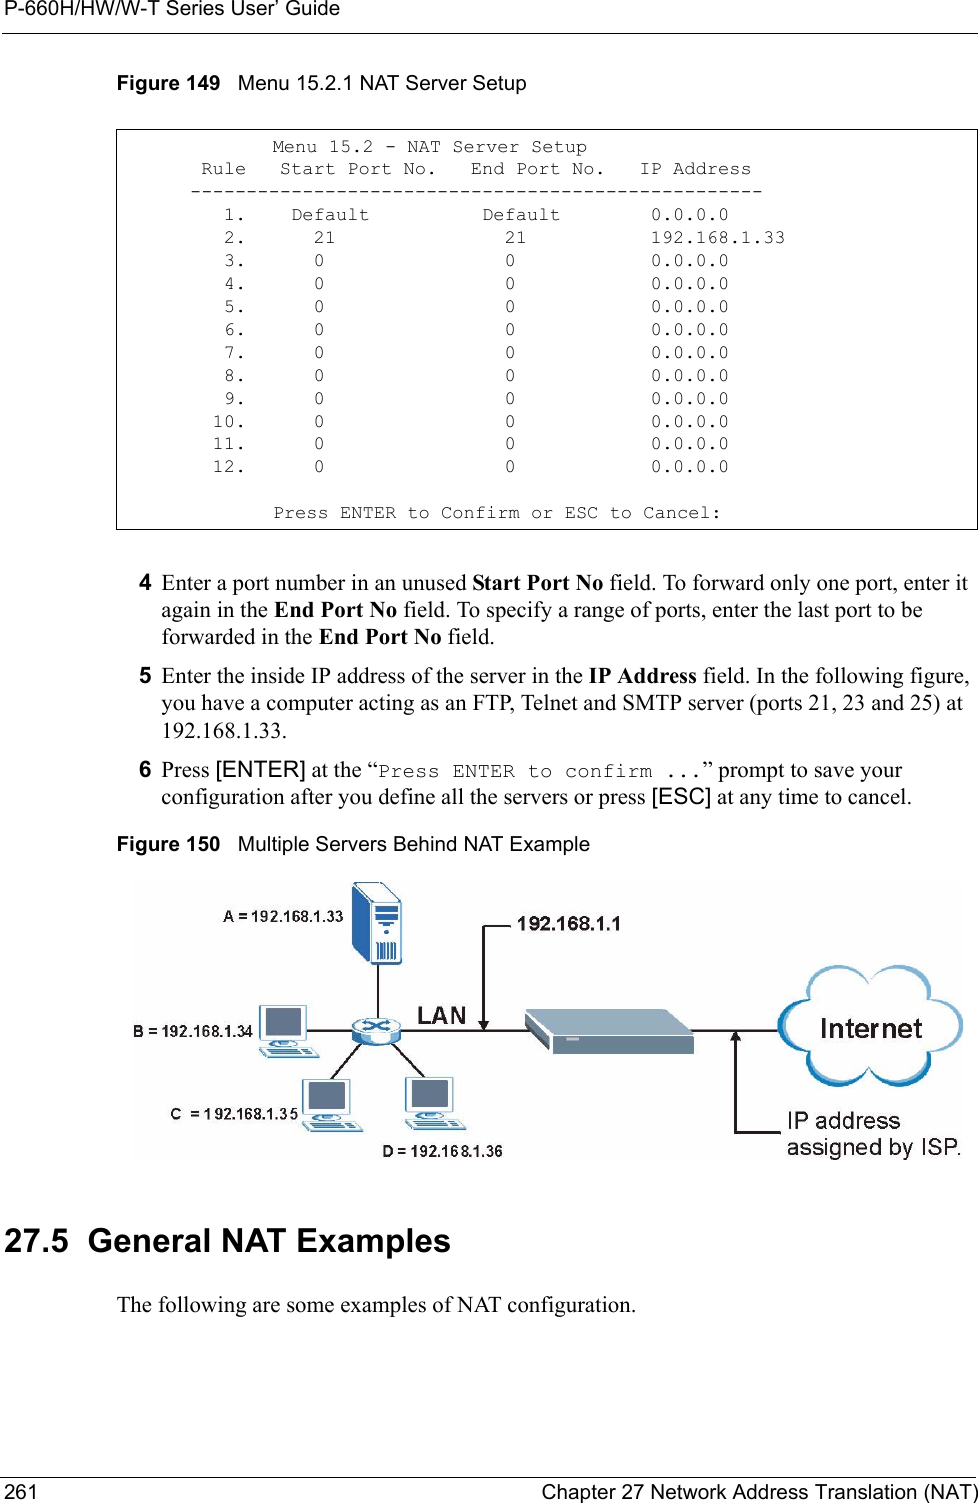 P-660H/HW/W-T Series User’ Guide261 Chapter 27 Network Address Translation (NAT)Figure 149   Menu 15.2.1 NAT Server Setup4Enter a port number in an unused Start Port No field. To forward only one port, enter it again in the End Port No field. To specify a range of ports, enter the last port to be forwarded in the End Port No field. 5Enter the inside IP address of the server in the IP Address field. In the following figure, you have a computer acting as an FTP, Telnet and SMTP server (ports 21, 23 and 25) at 192.168.1.33.6Press [ENTER] at the “Press ENTER to confirm ...” prompt to save your configuration after you define all the servers or press [ESC] at any time to cancel.Figure 150   Multiple Servers Behind NAT Example27.5  General NAT ExamplesThe following are some examples of NAT configuration.Menu 15.2 - NAT Server Setup       Rule   Start Port No.   End Port No.   IP Address      ---------------------------------------------------         1.    Default          Default        0.0.0.0         2.      21               21           192.168.1.33         3.      0                0            0.0.0.0         4.      0                0            0.0.0.0         5.      0                0            0.0.0.0         6.      0                0            0.0.0.0         7.      0                0            0.0.0.0         8.      0                0            0.0.0.0         9.      0                0            0.0.0.0        10.      0                0            0.0.0.0        11.      0                0            0.0.0.0        12.      0                0            0.0.0.0Press ENTER to Confirm or ESC to Cancel: